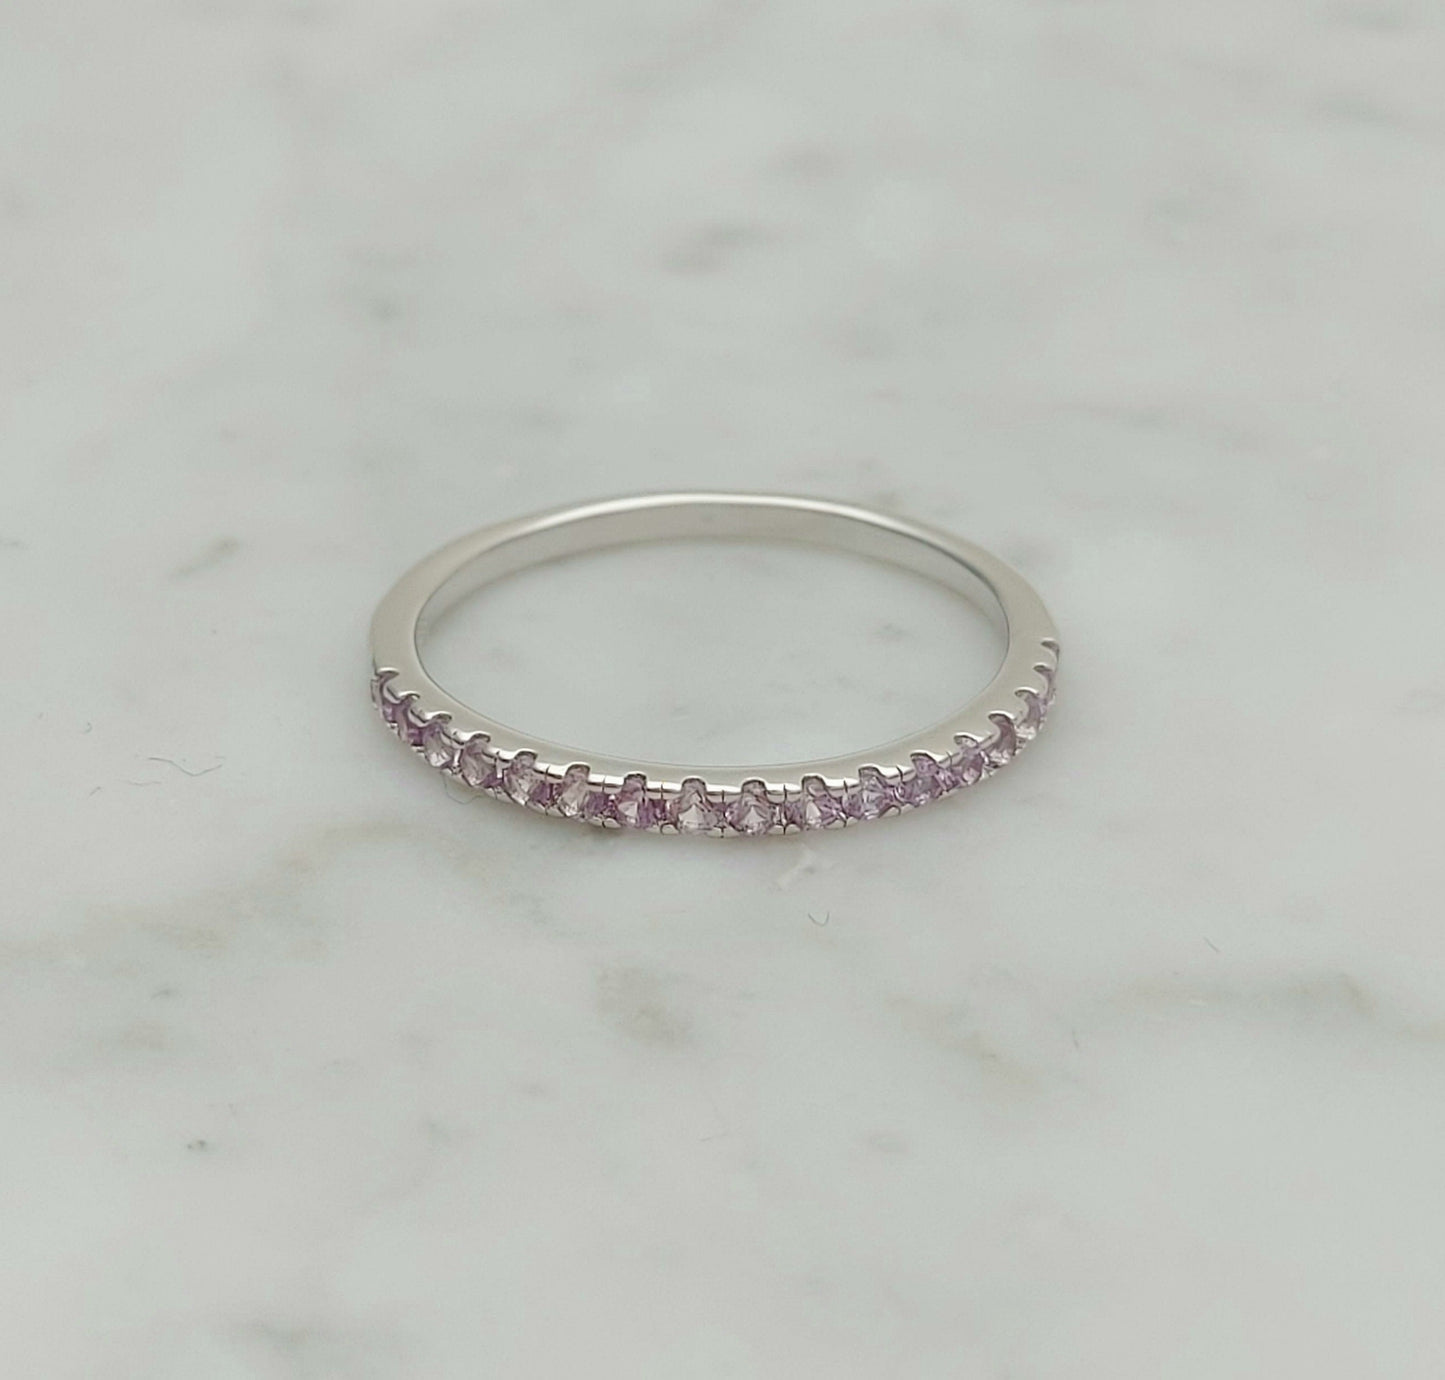 1.8mm wide Alexandrite Half Eternity ring in white gold or Silver - stacking ring - wedding band - handmade engagement ring